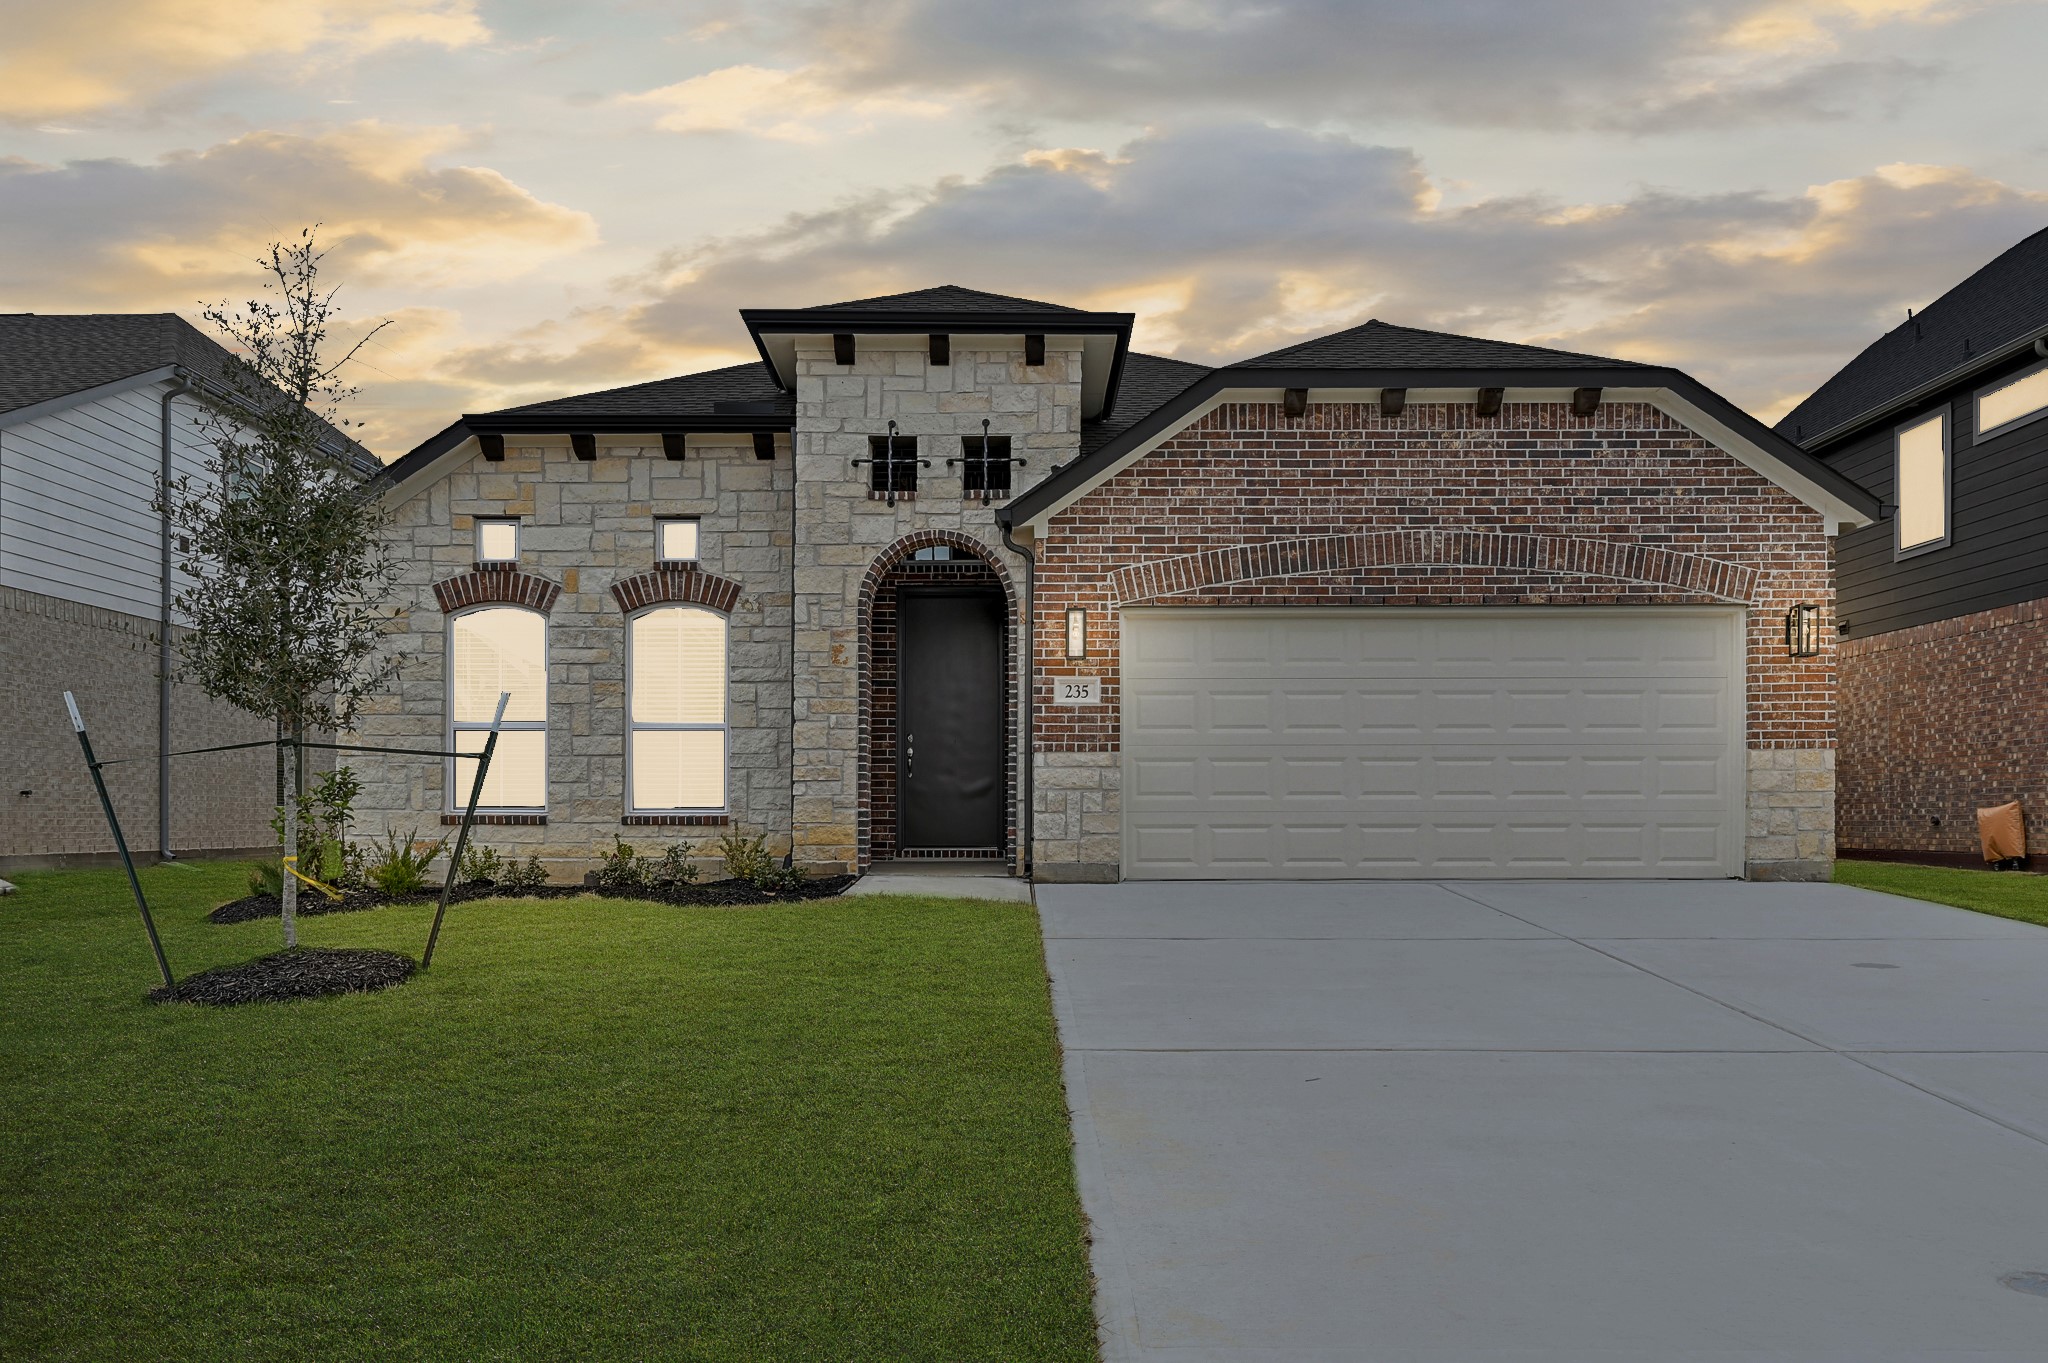 Welcome home to 235 Upland Drive located in the community of Beacon Hill and zoned to Waller ISD.